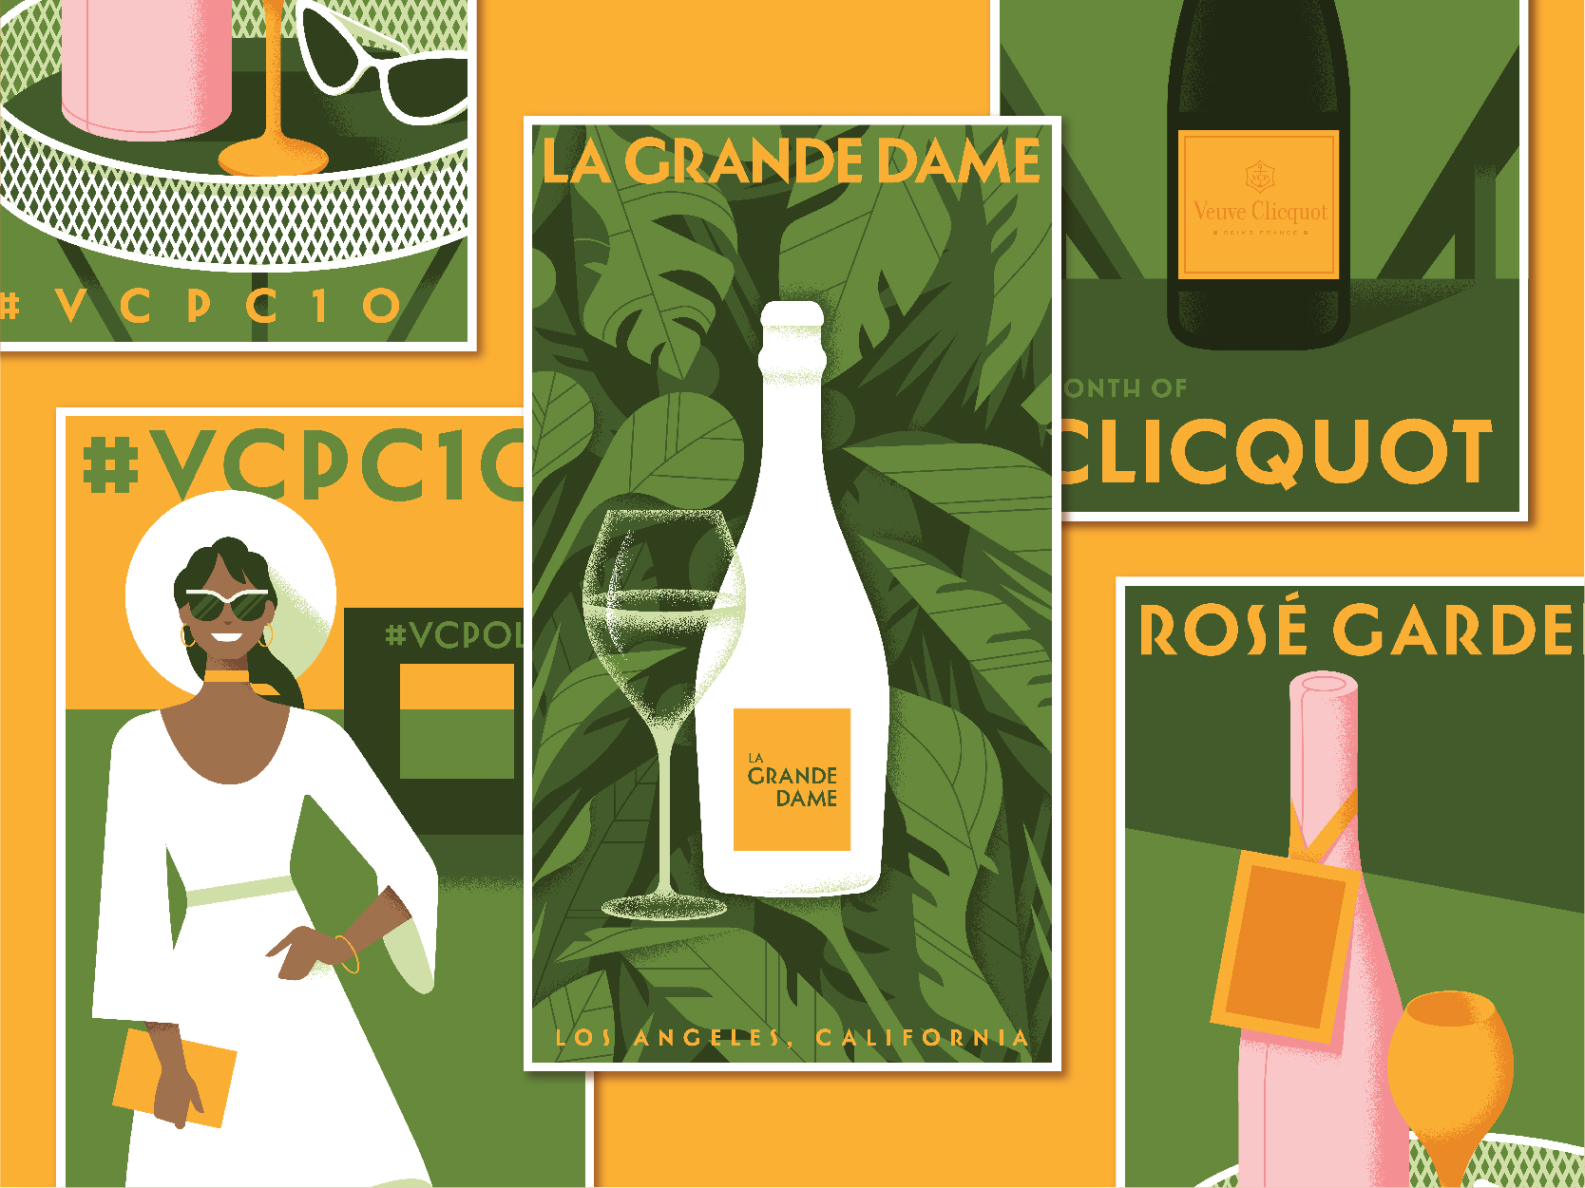 Veuve Clicquot Classic by Ryan Bosse on Dribbble